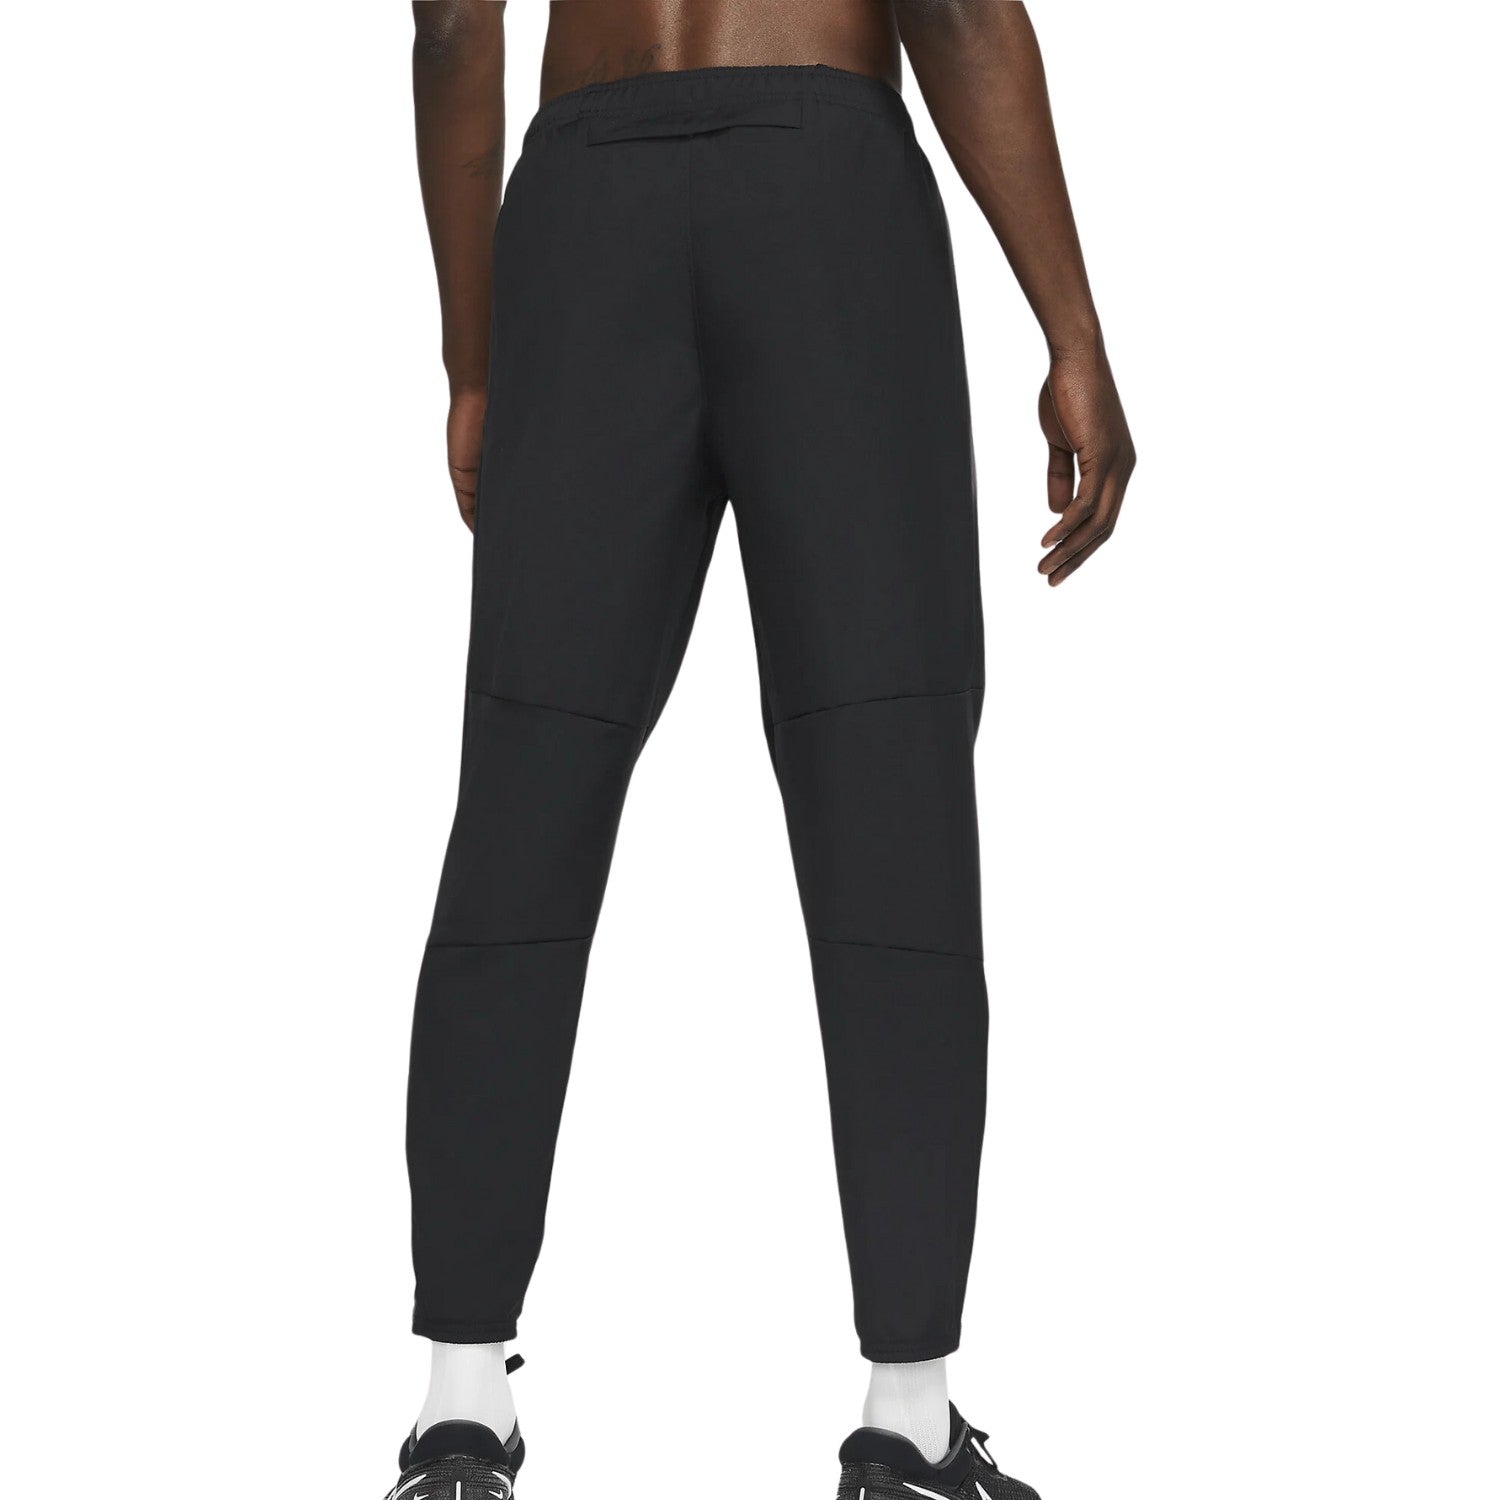 Nike Dri-fit Challenger Woven Running Pants Mens Style : Dd4894